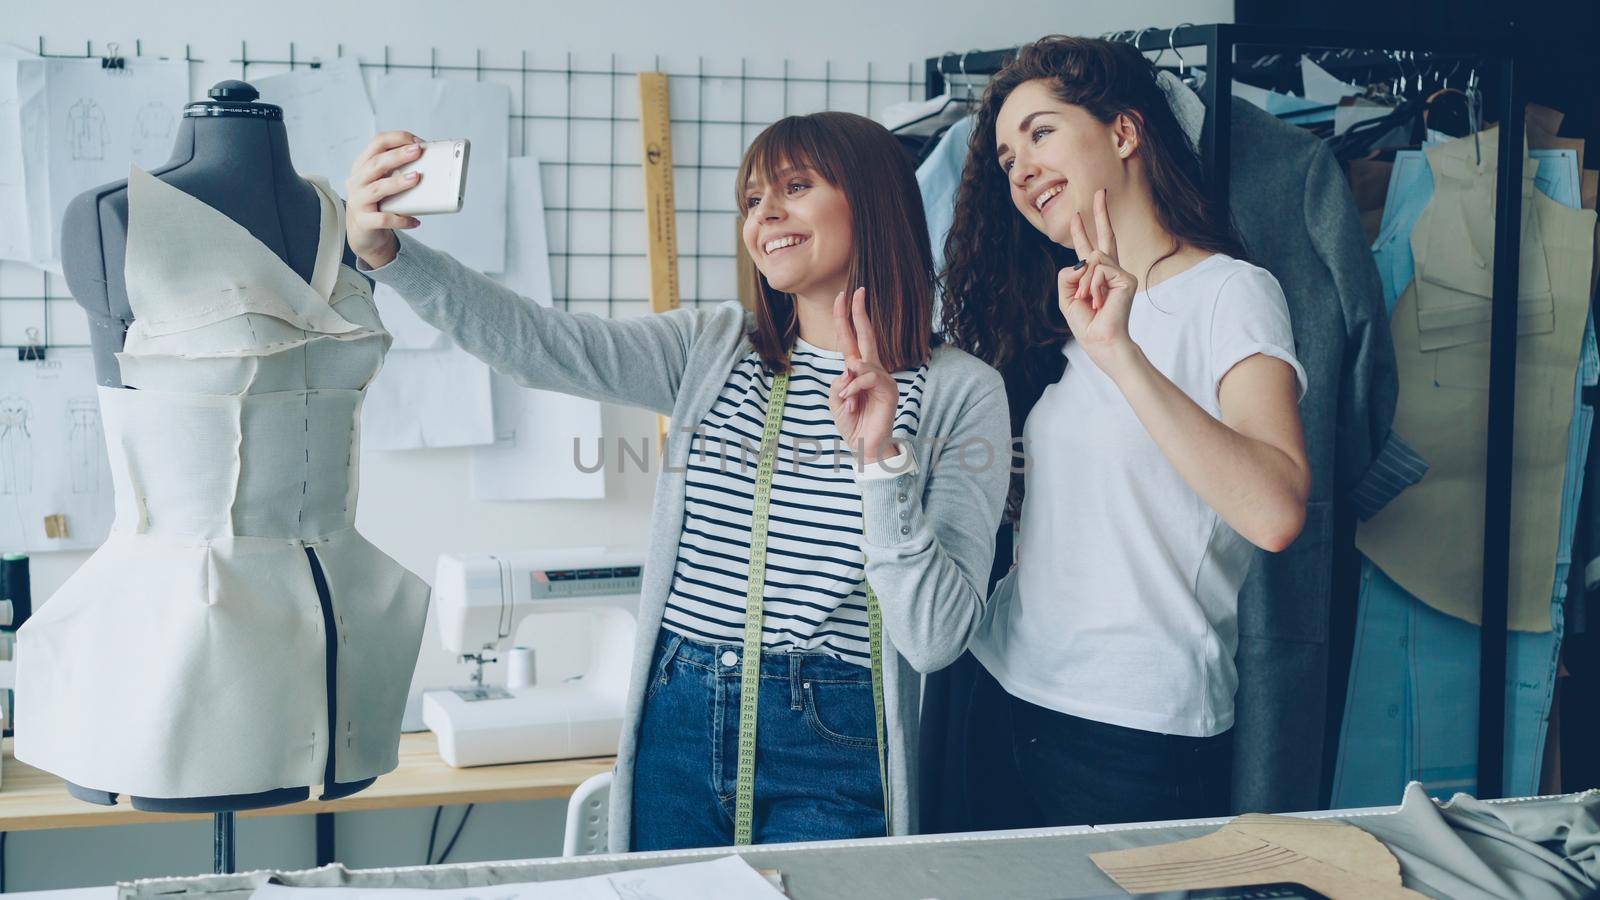 Two cheerful clothing designers are making funny selfie with smart phone while standing beside clothed mannequin in studio. Attractive women are smiling and posing. by silverkblack